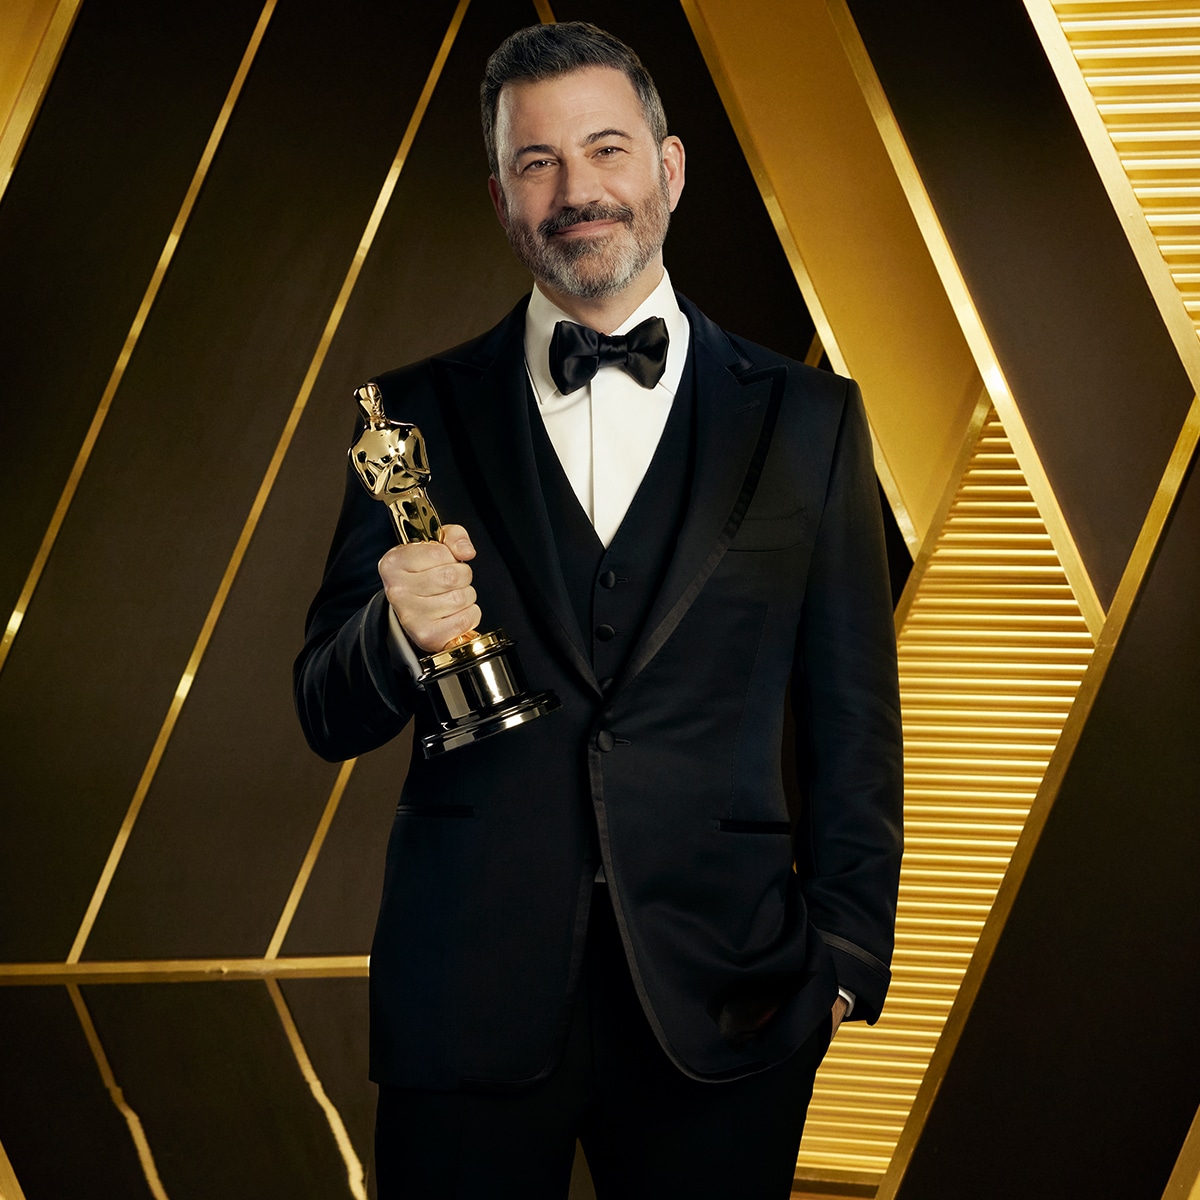 Oscars 2022: Nominees, Host, Date, Time, Channel